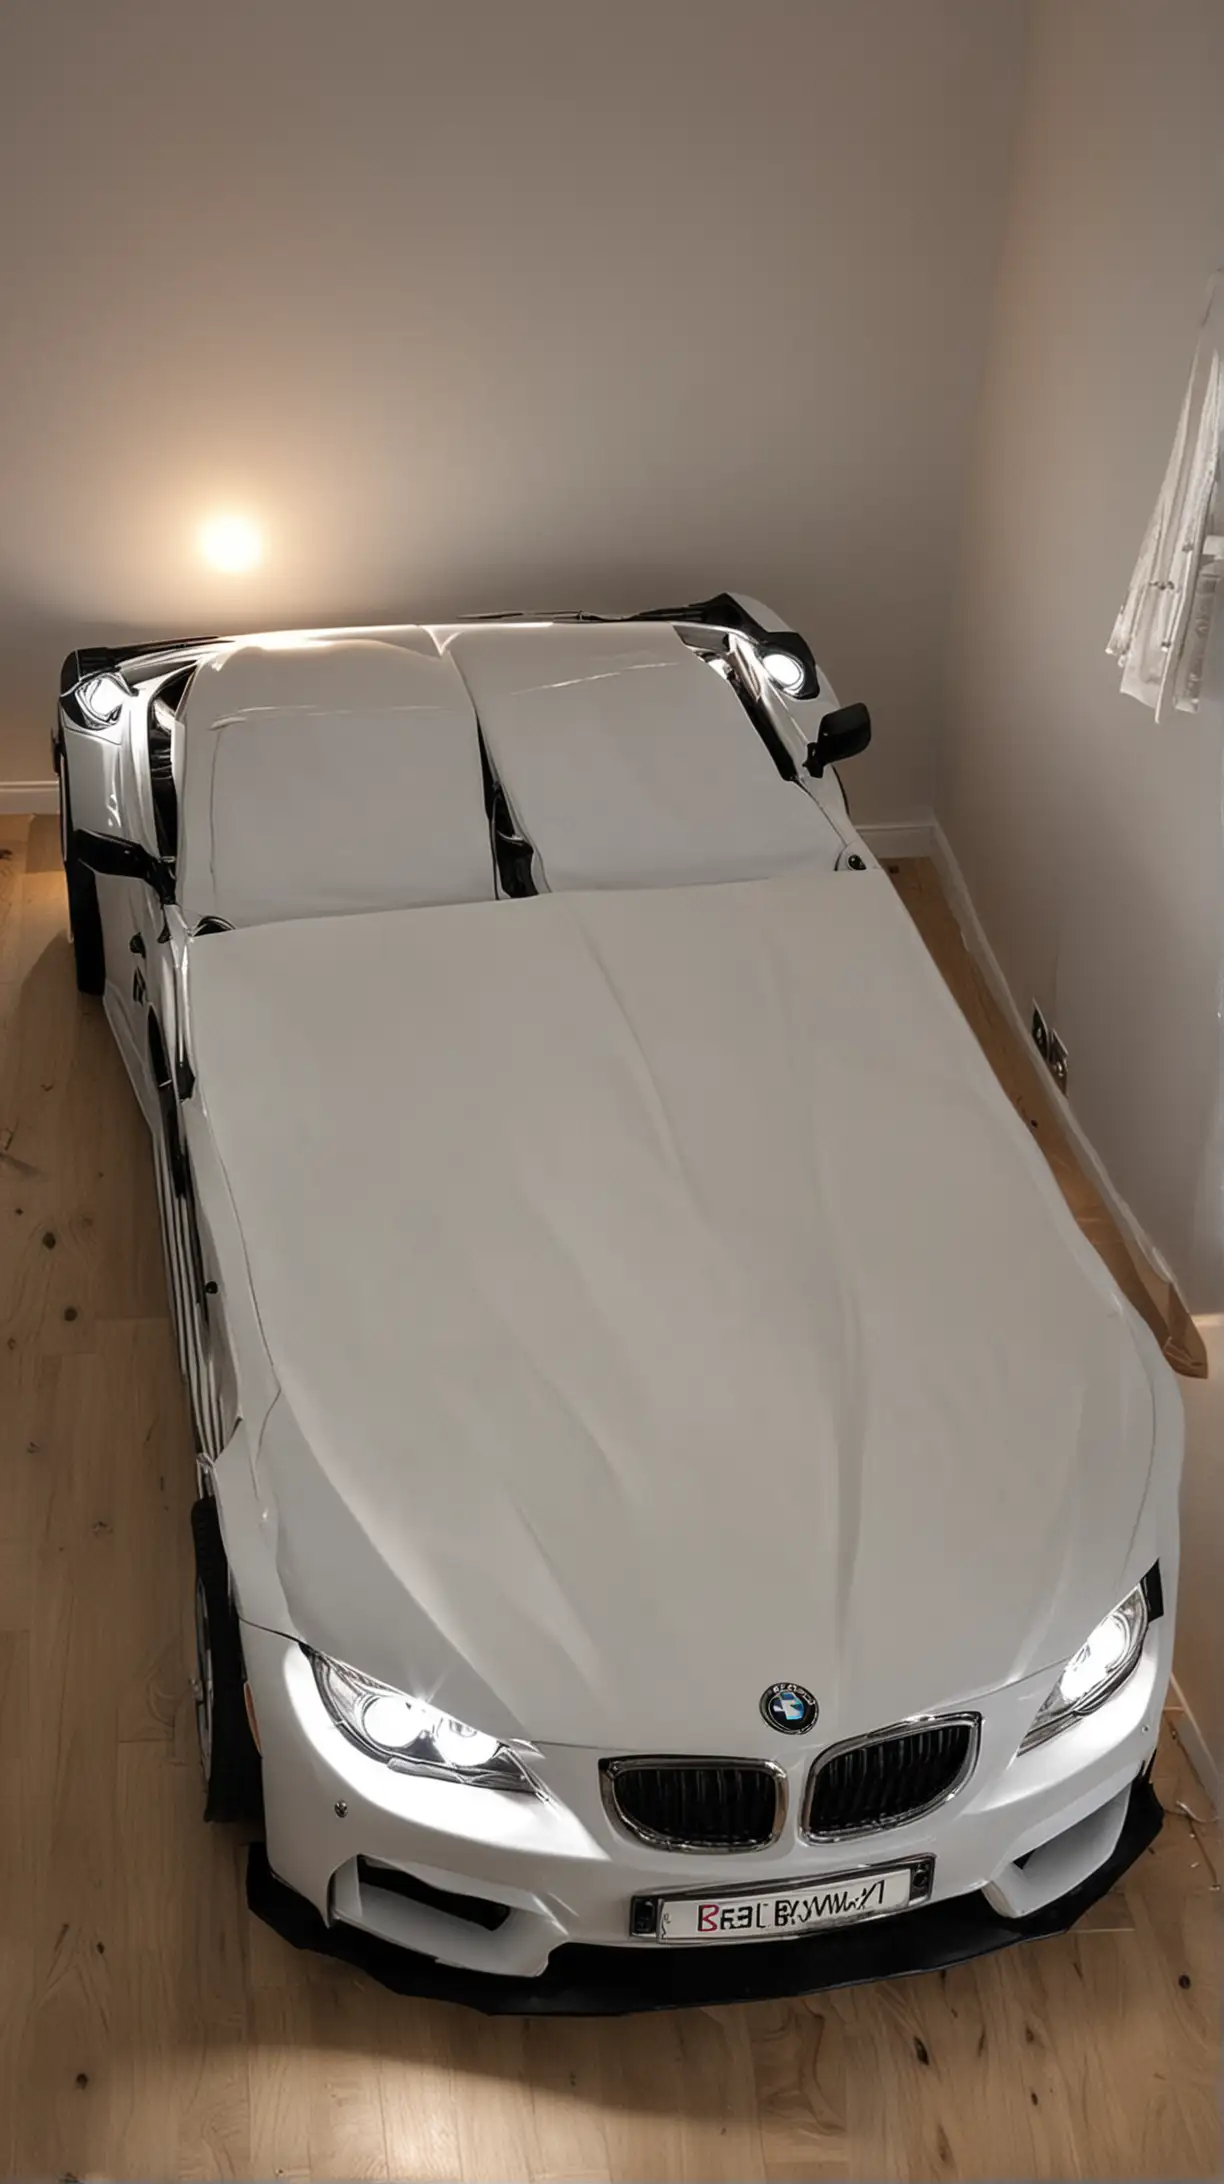 Luxurious Double Bed Shaped like a BMW Car with Glowing Headlights